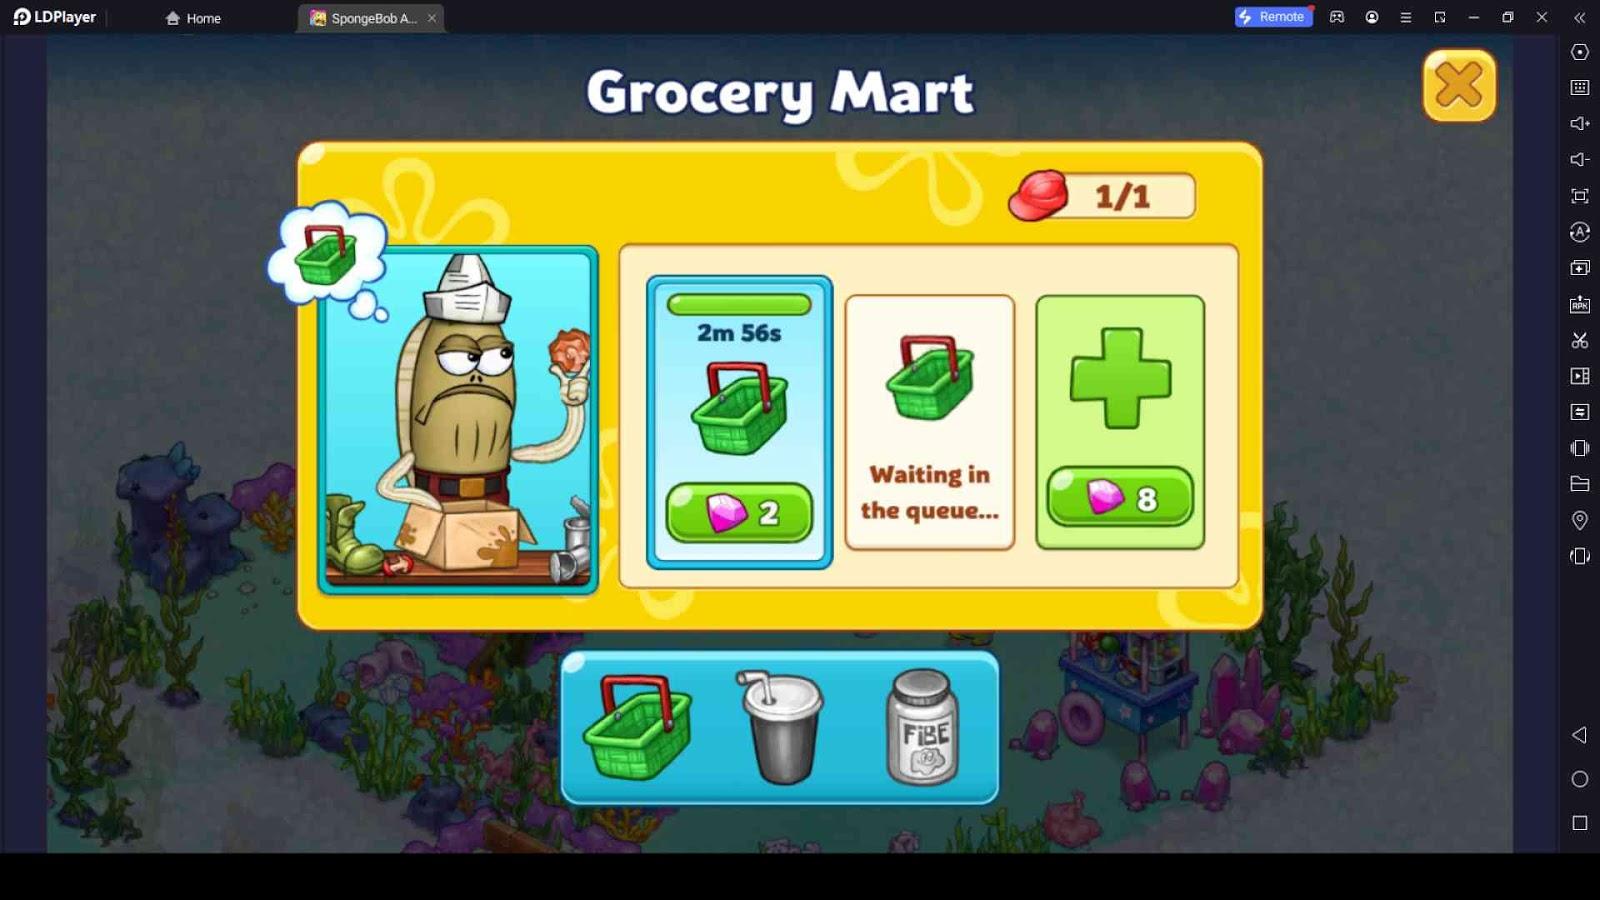 Grocery Mart